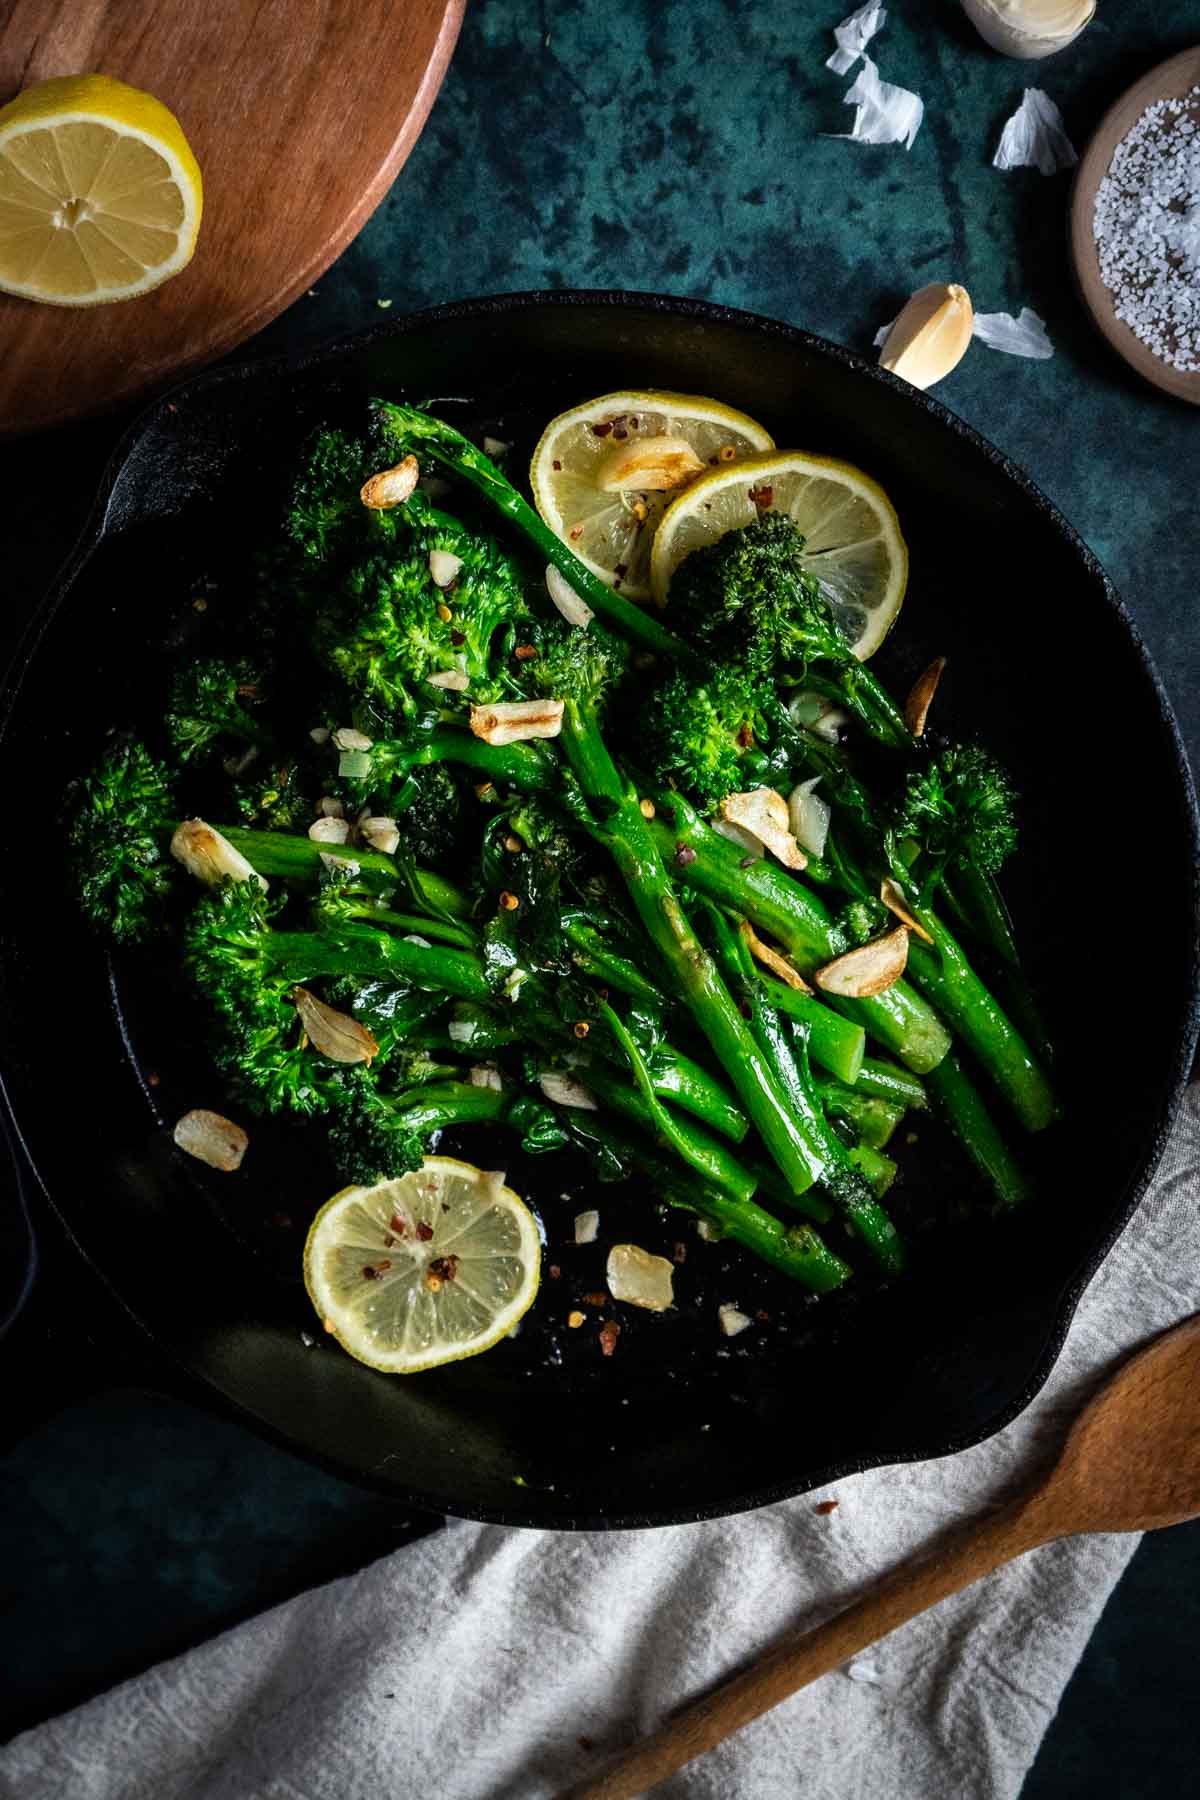 Pan of broccolini on counter with napkin and wooden spoon.